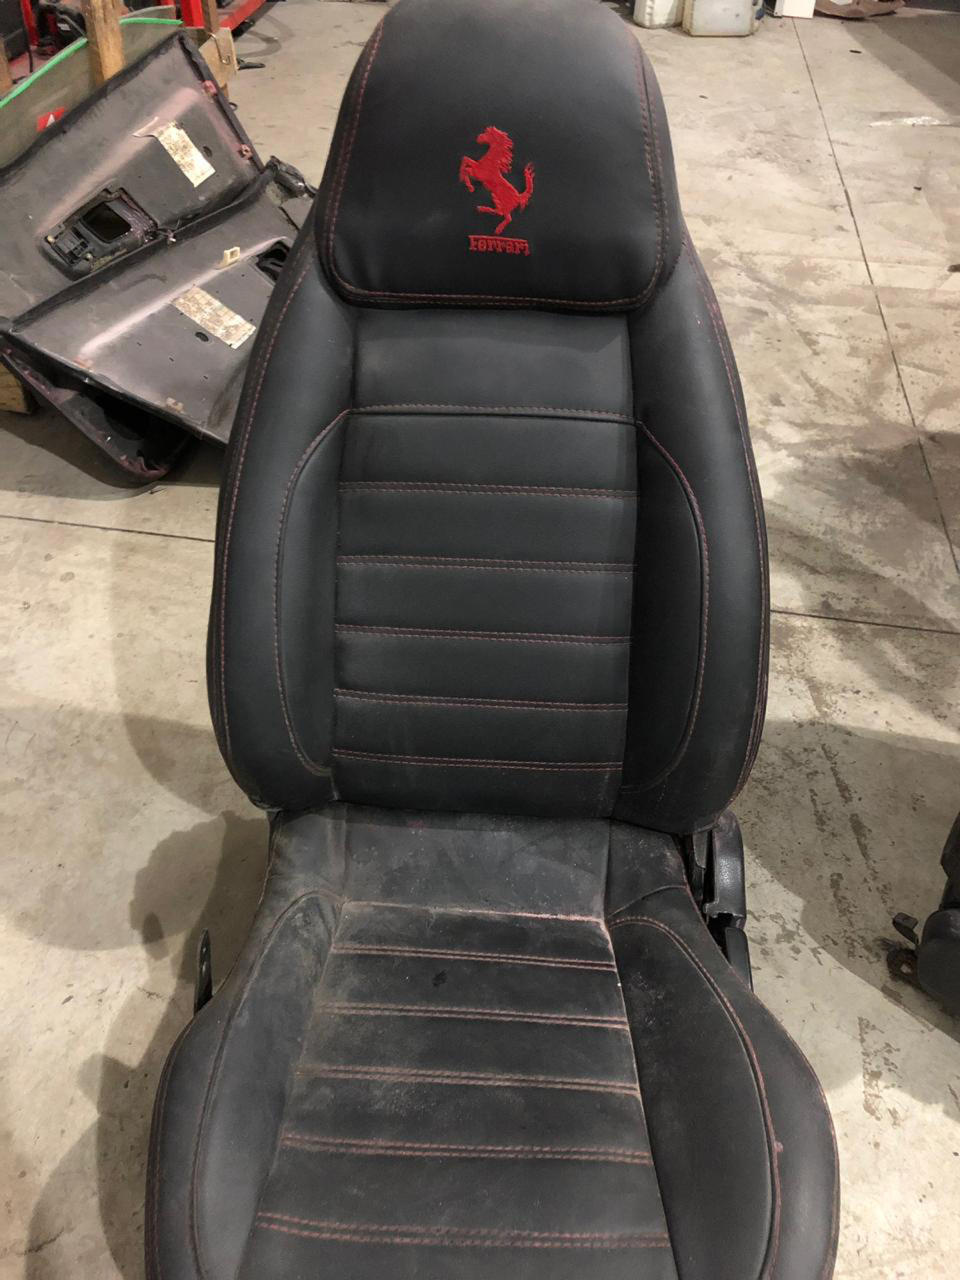 This July 15, 2019 photo released by Itajai Civil Police shows the seat of a car embroidered with a fake Ferrari logo, inside a workshop in Itajai, Brazil. Brazilian police dismantled the clandestine workshop run by a father and son who assembled fake Ferraris and Lamborghinis to order, in Brazil's southern state of Santa Catarina. (Itajai Civil Police via AP)